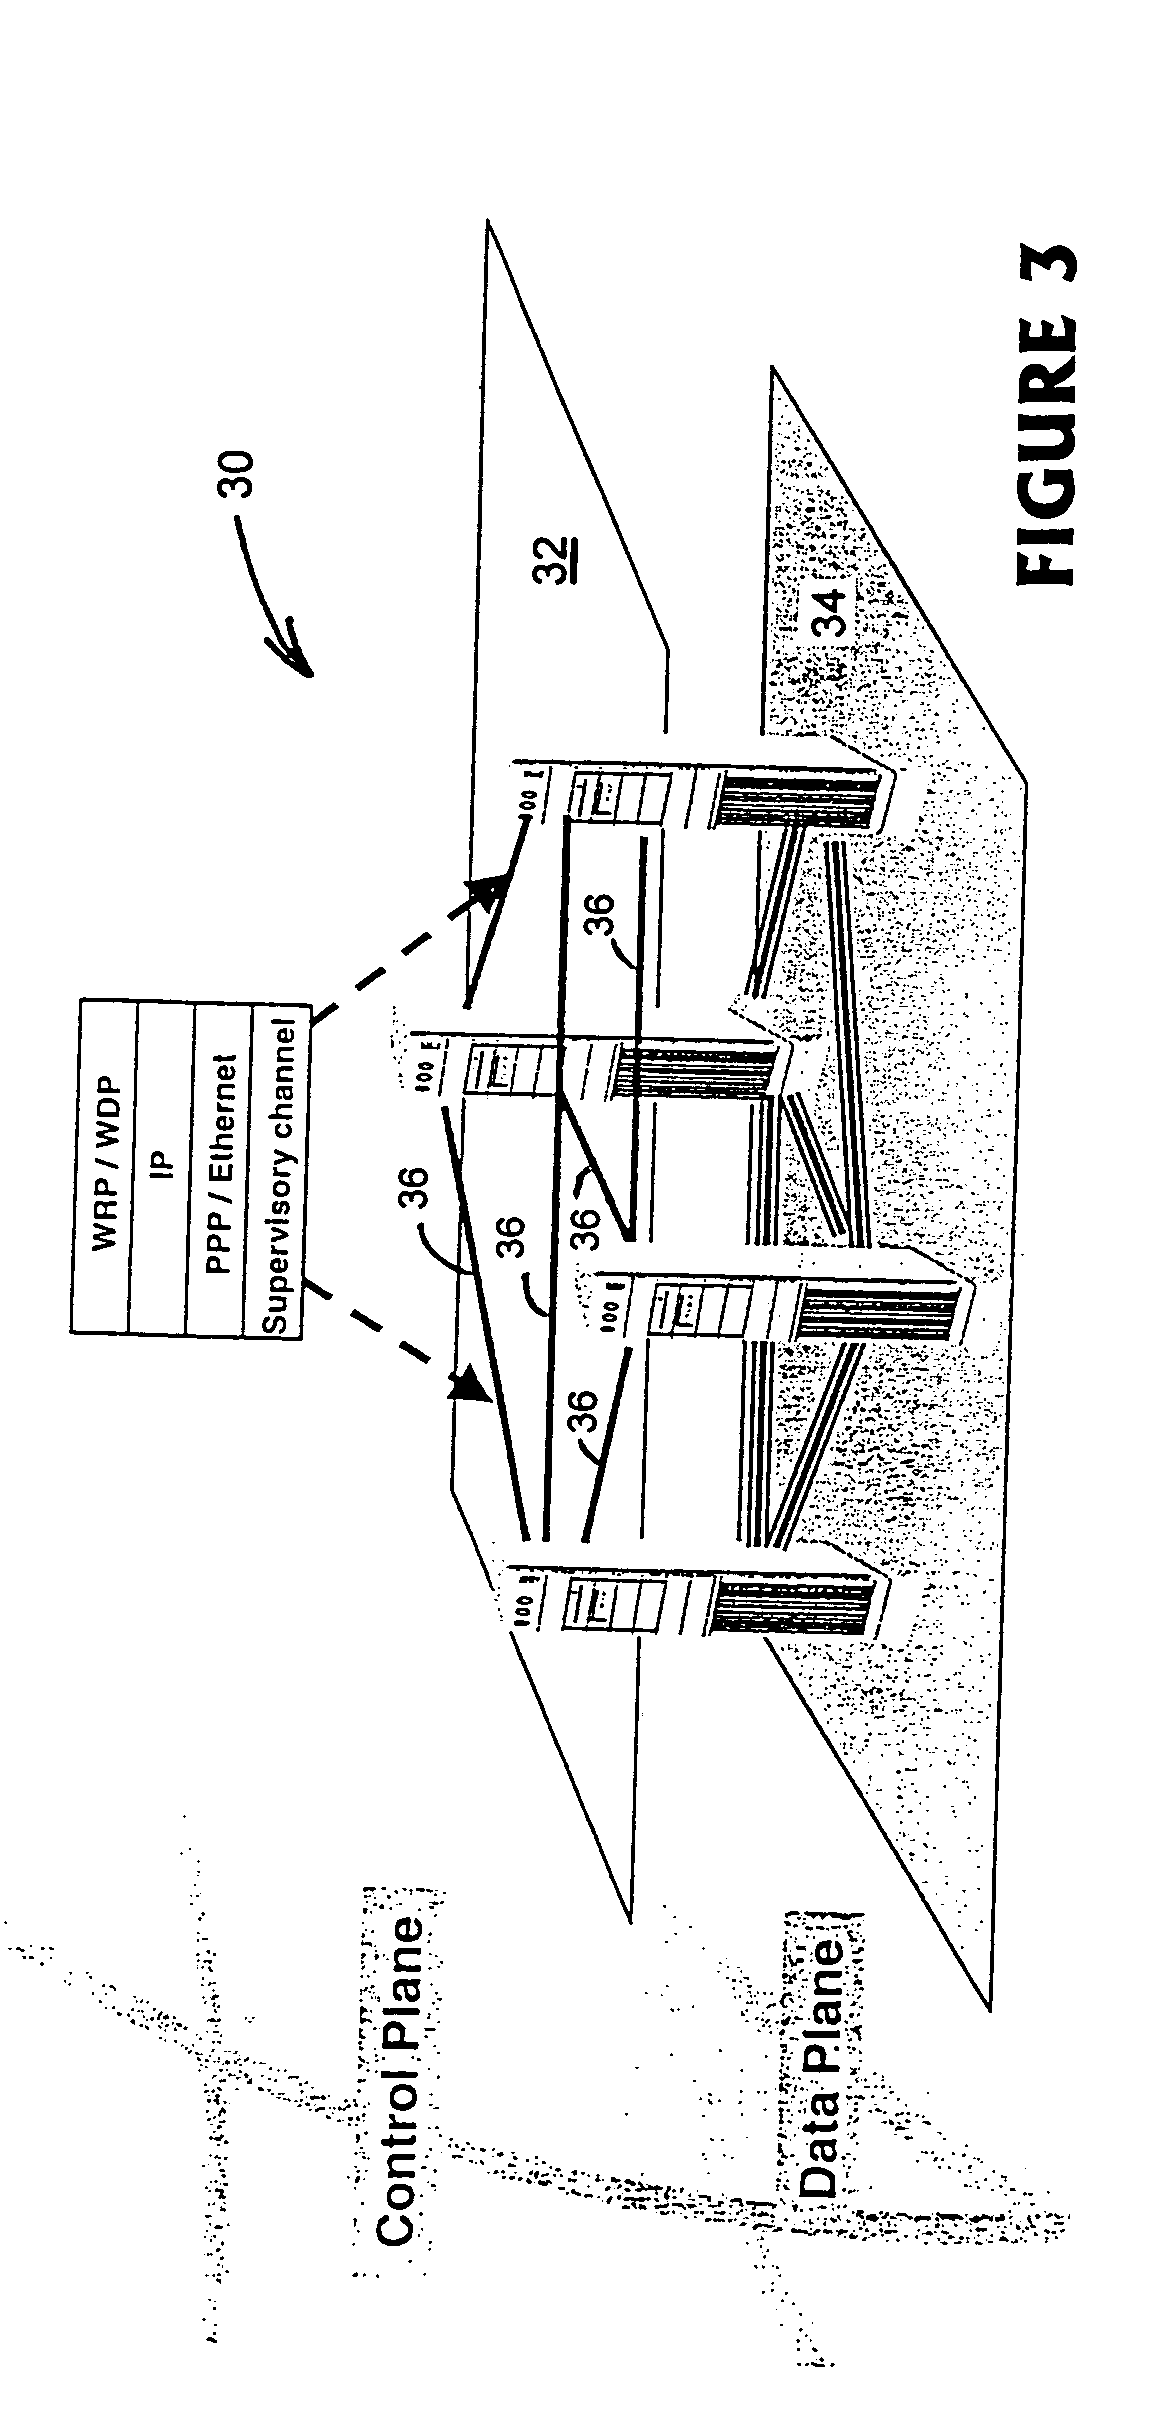 Supervisory control plane over wavelength routed networks